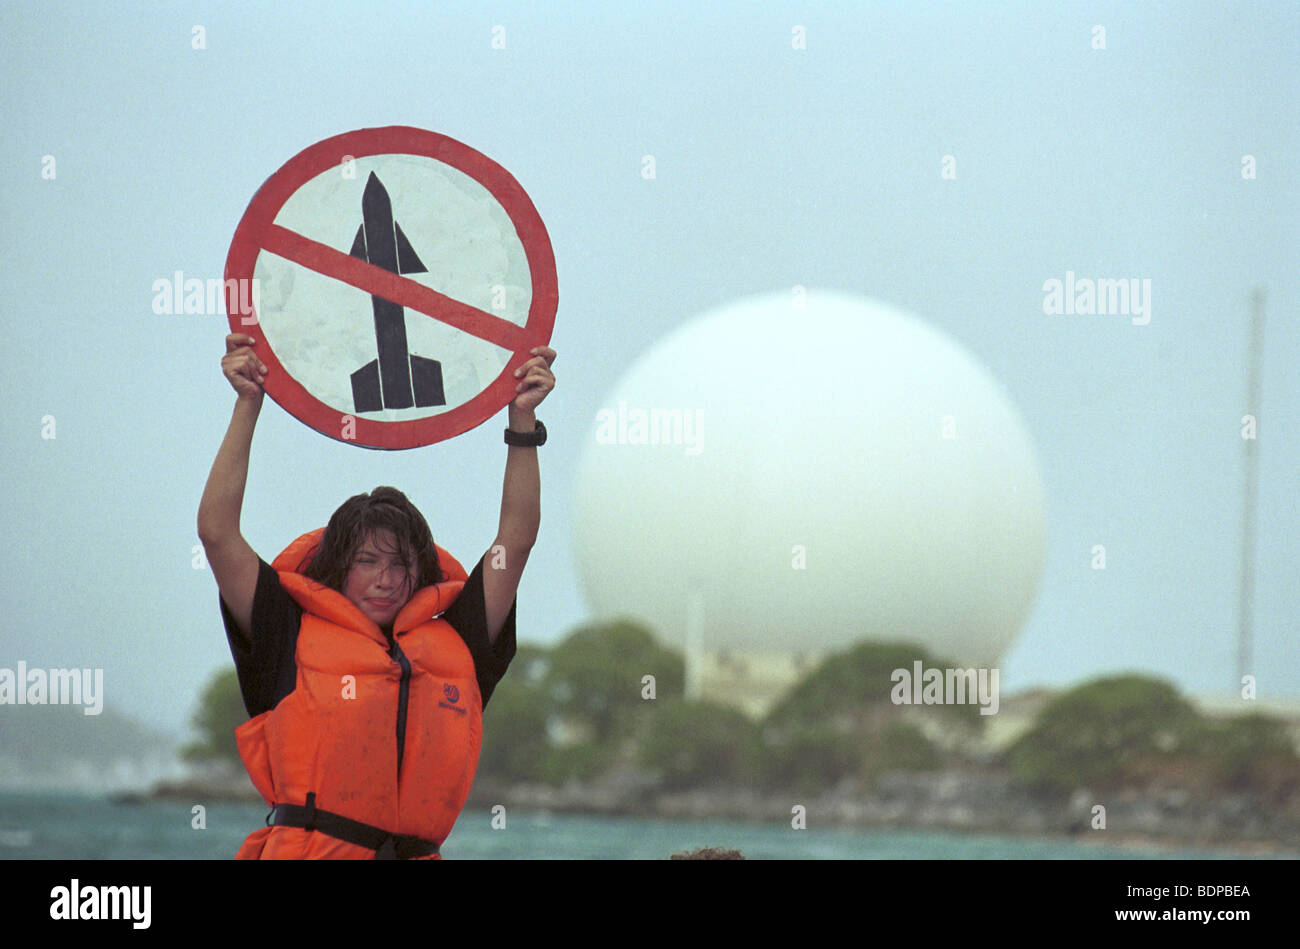 Anti US Star Wars protest at Kwajelein Atoll, North Pacific with the large Radar dome used to track missiles in background Stock Photo